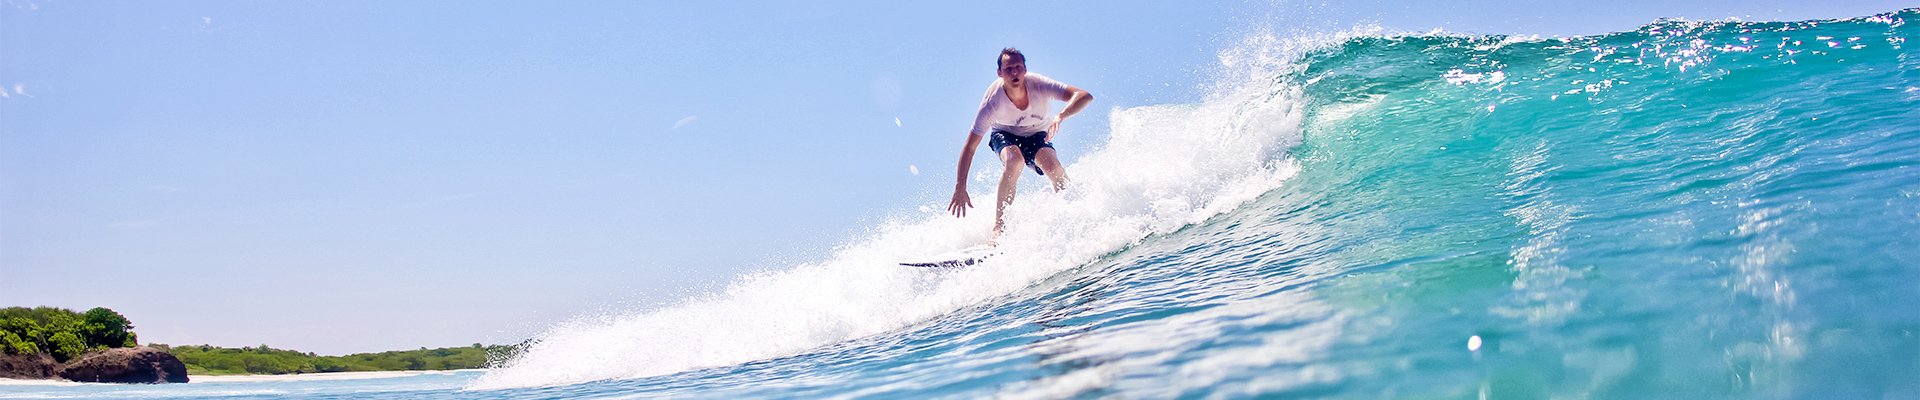 Wildmex: One of the best places to learn to surf in Punta Mita - Coached Surf Trips